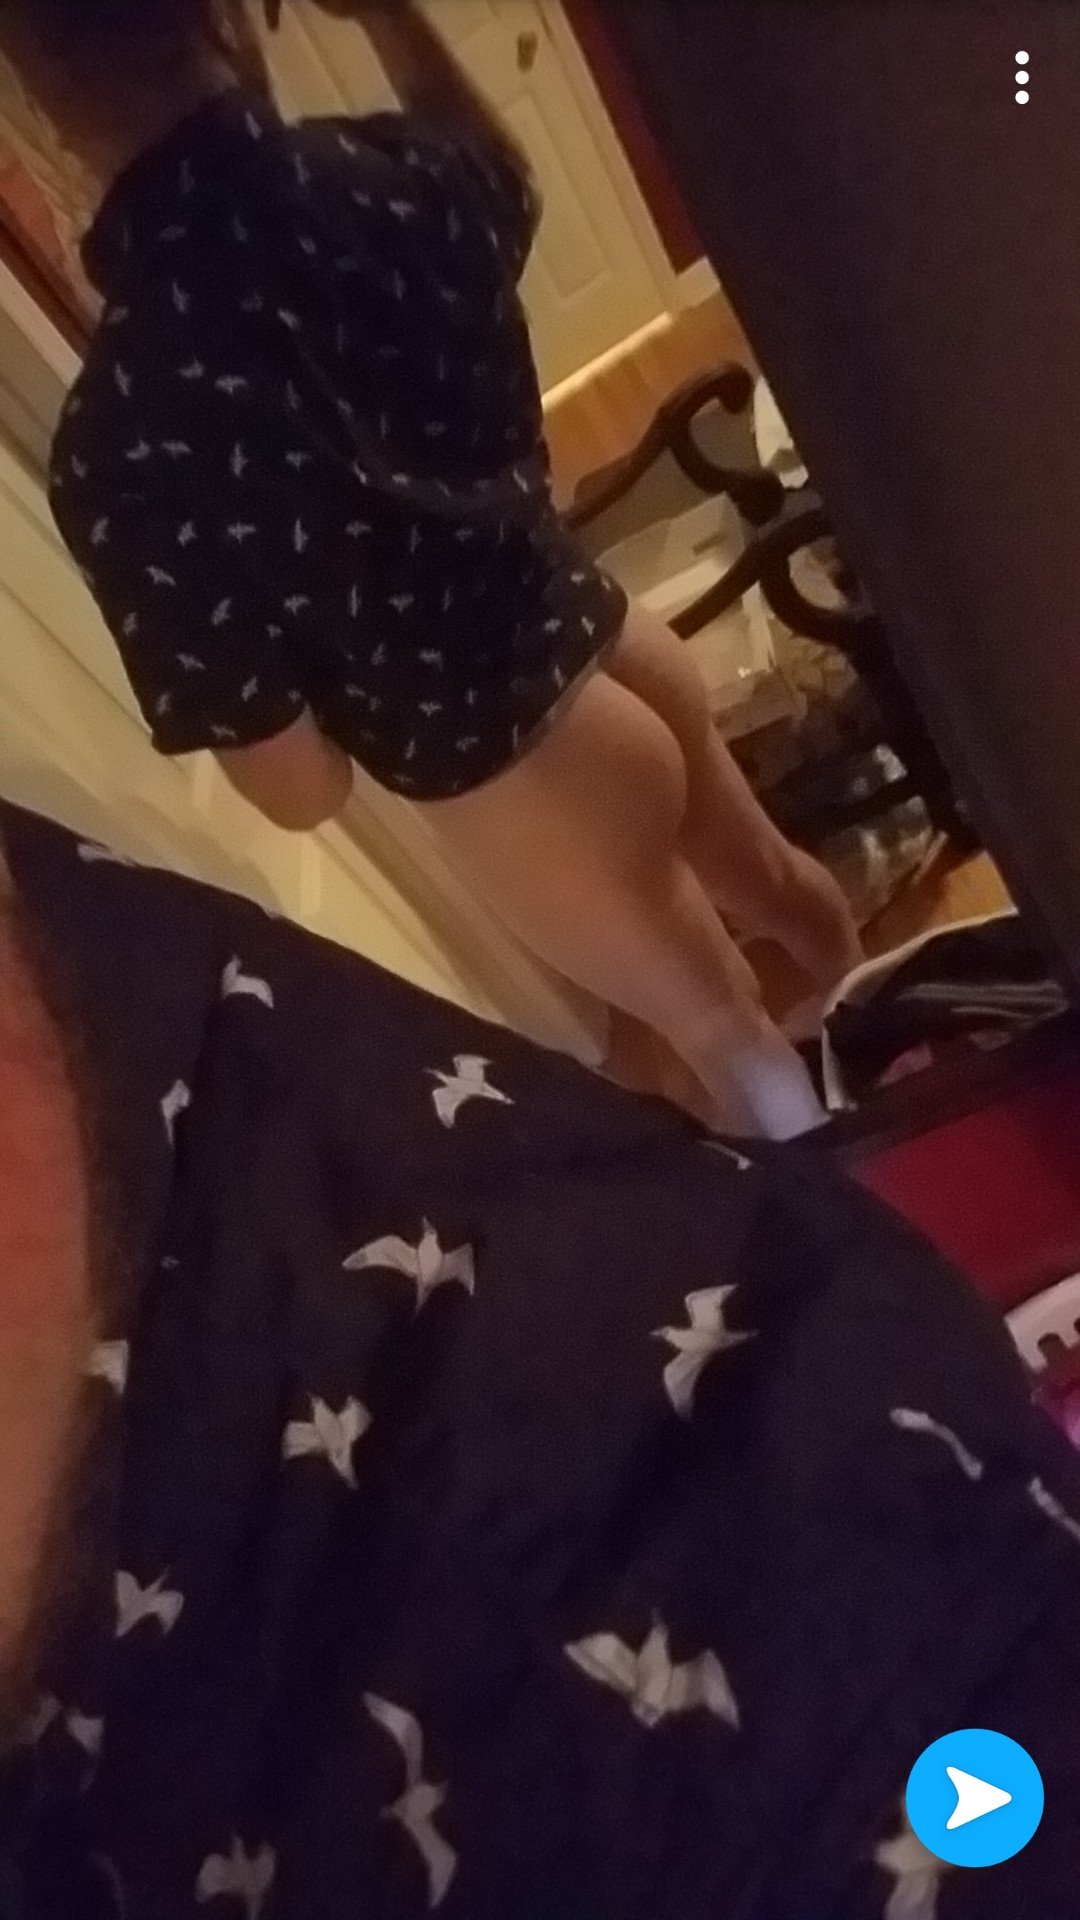 Message me for my snap ;)